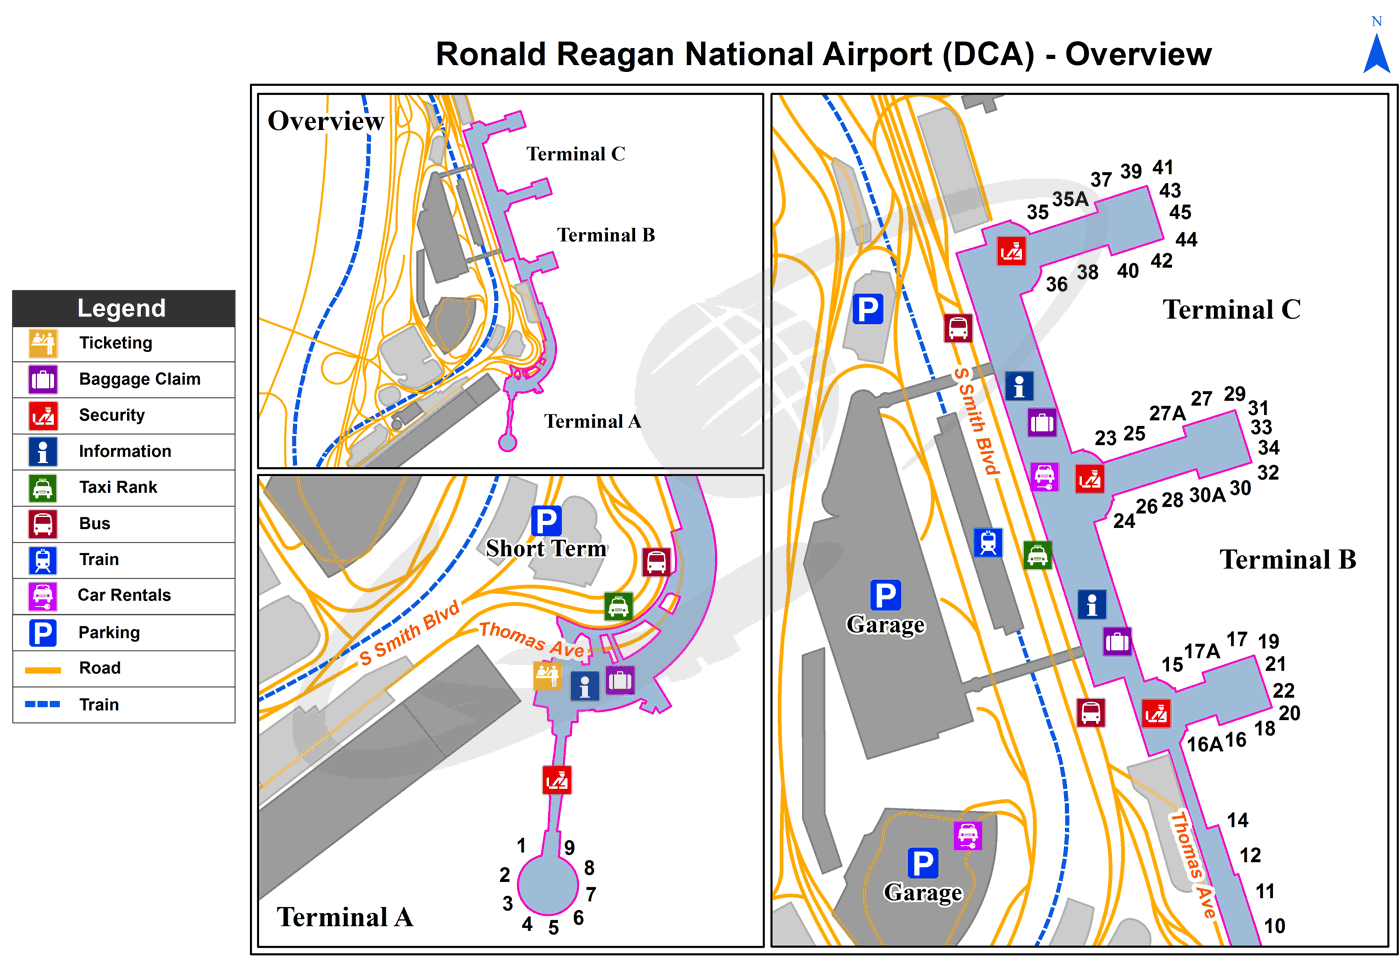 DCA_overview_map